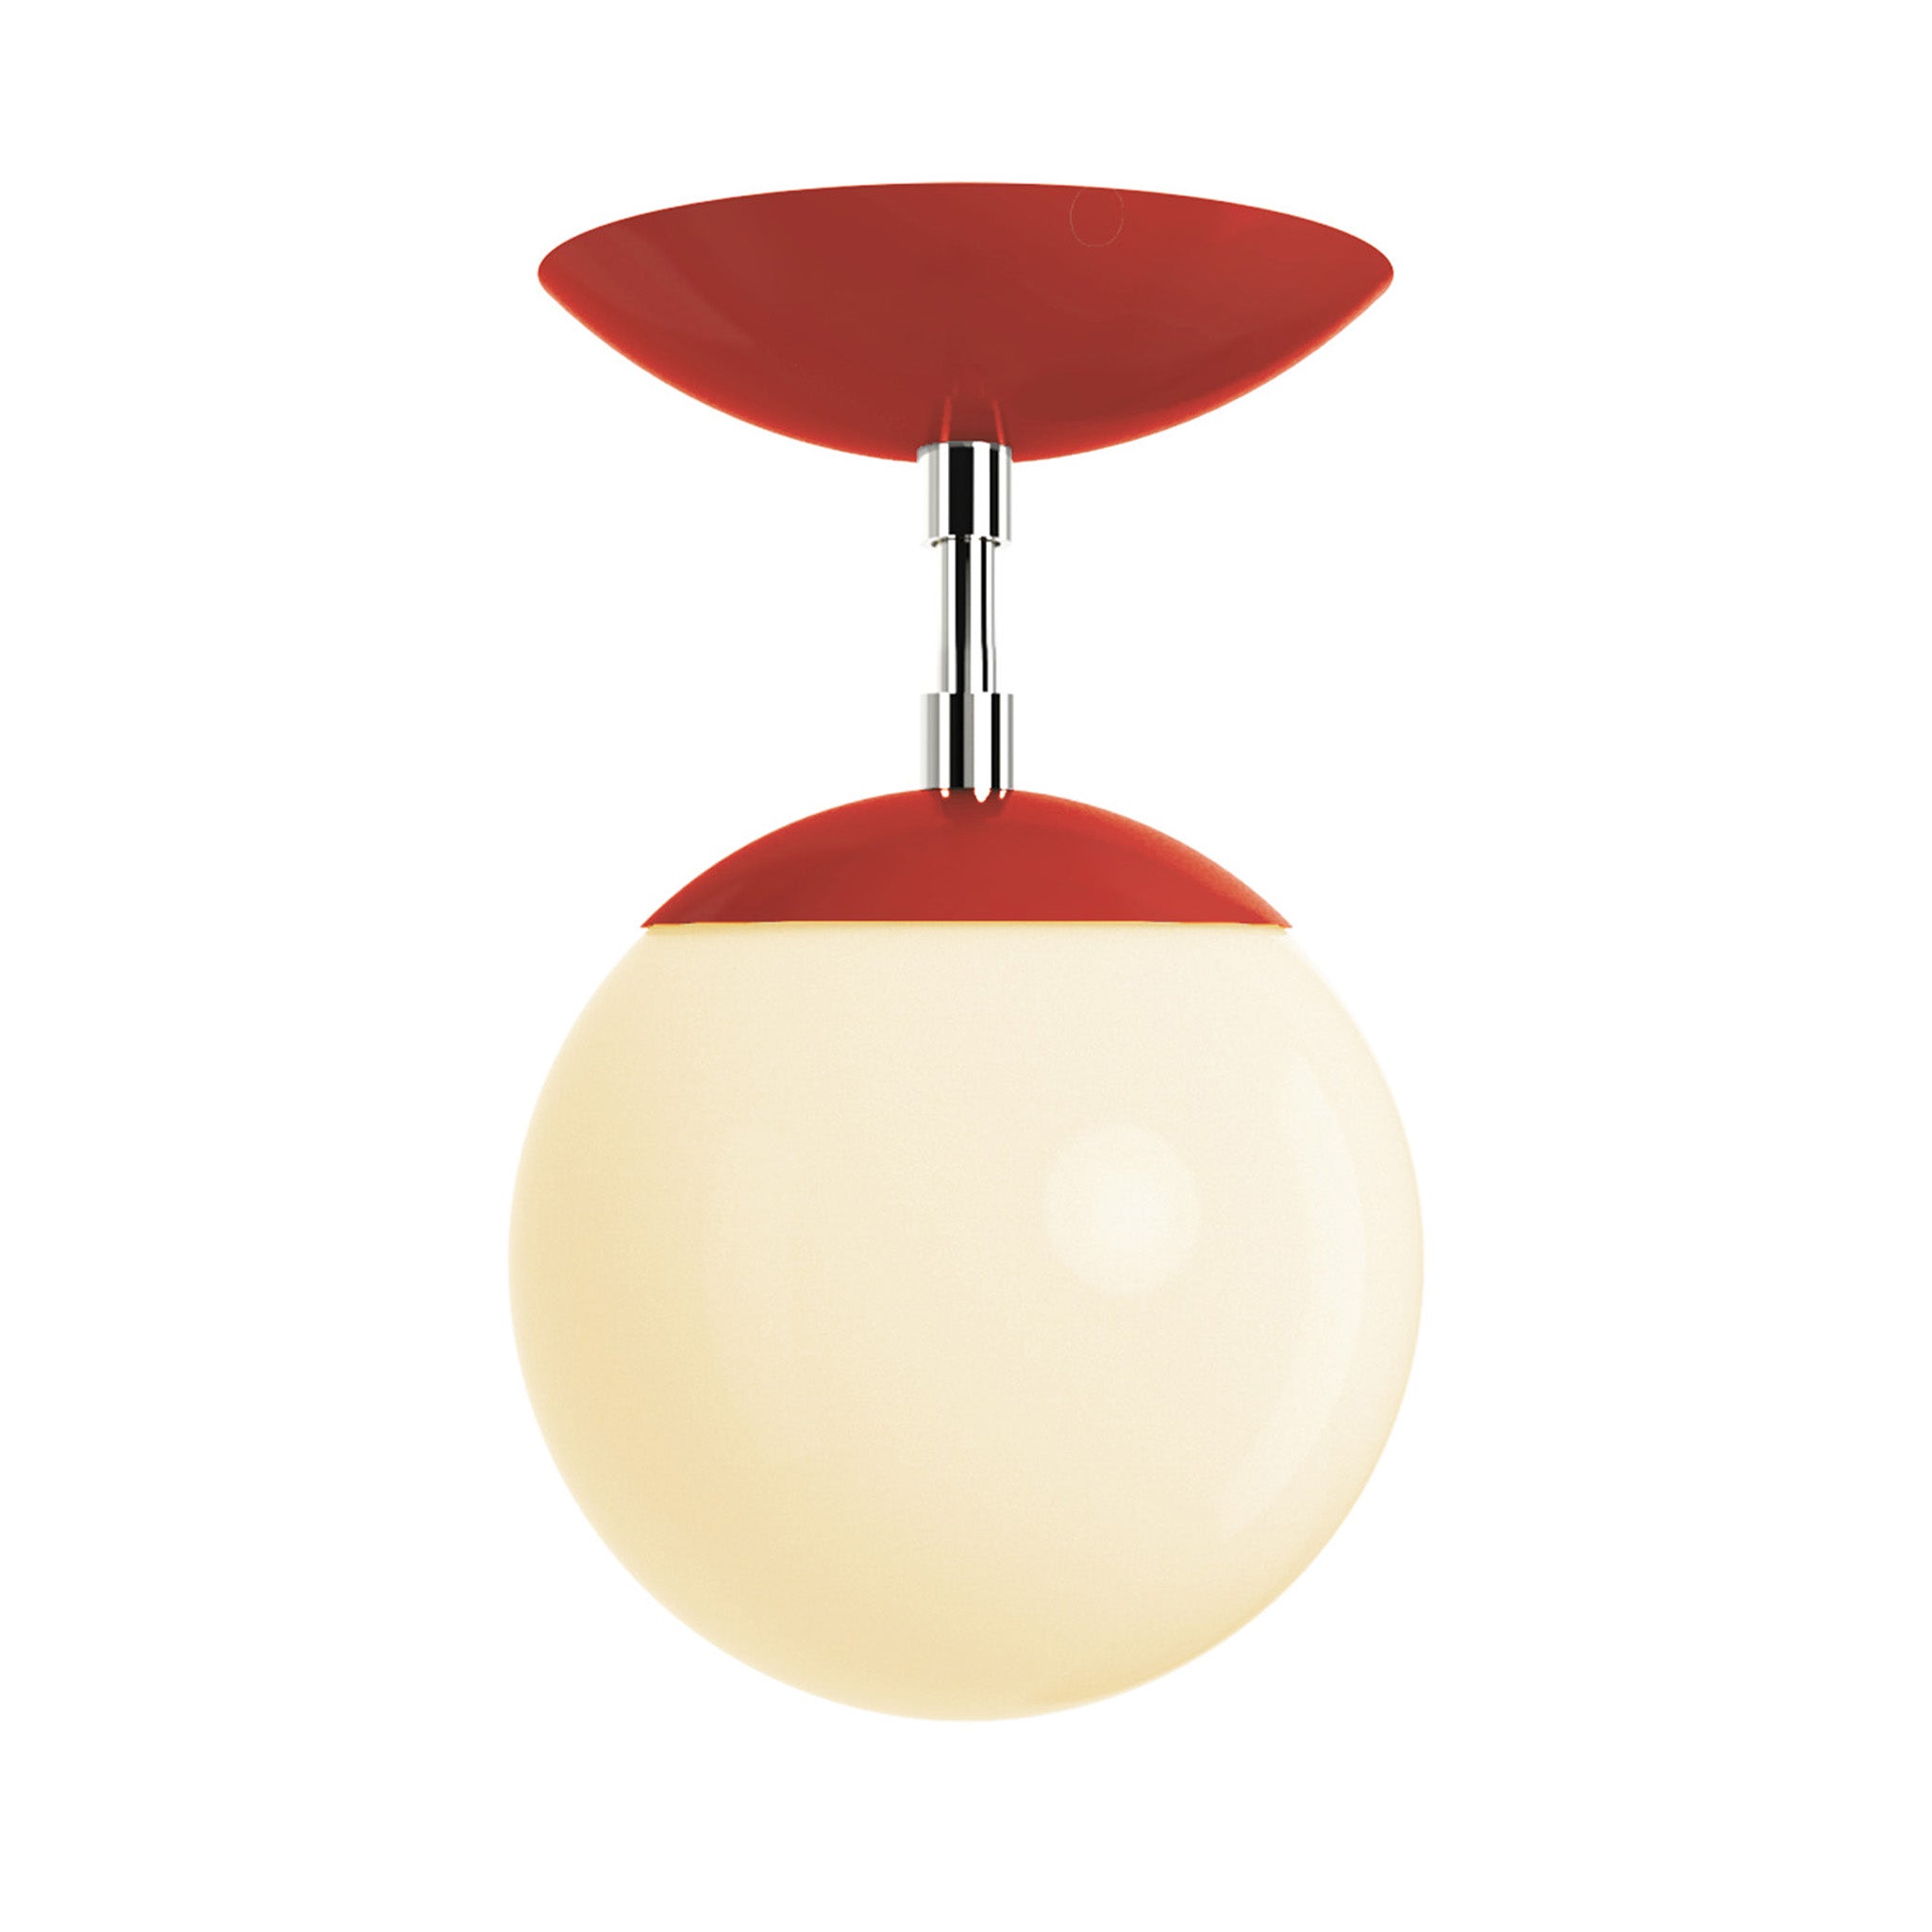 Polished nickel and riding hood red cap globe flush mount 6" dutton brown lighting